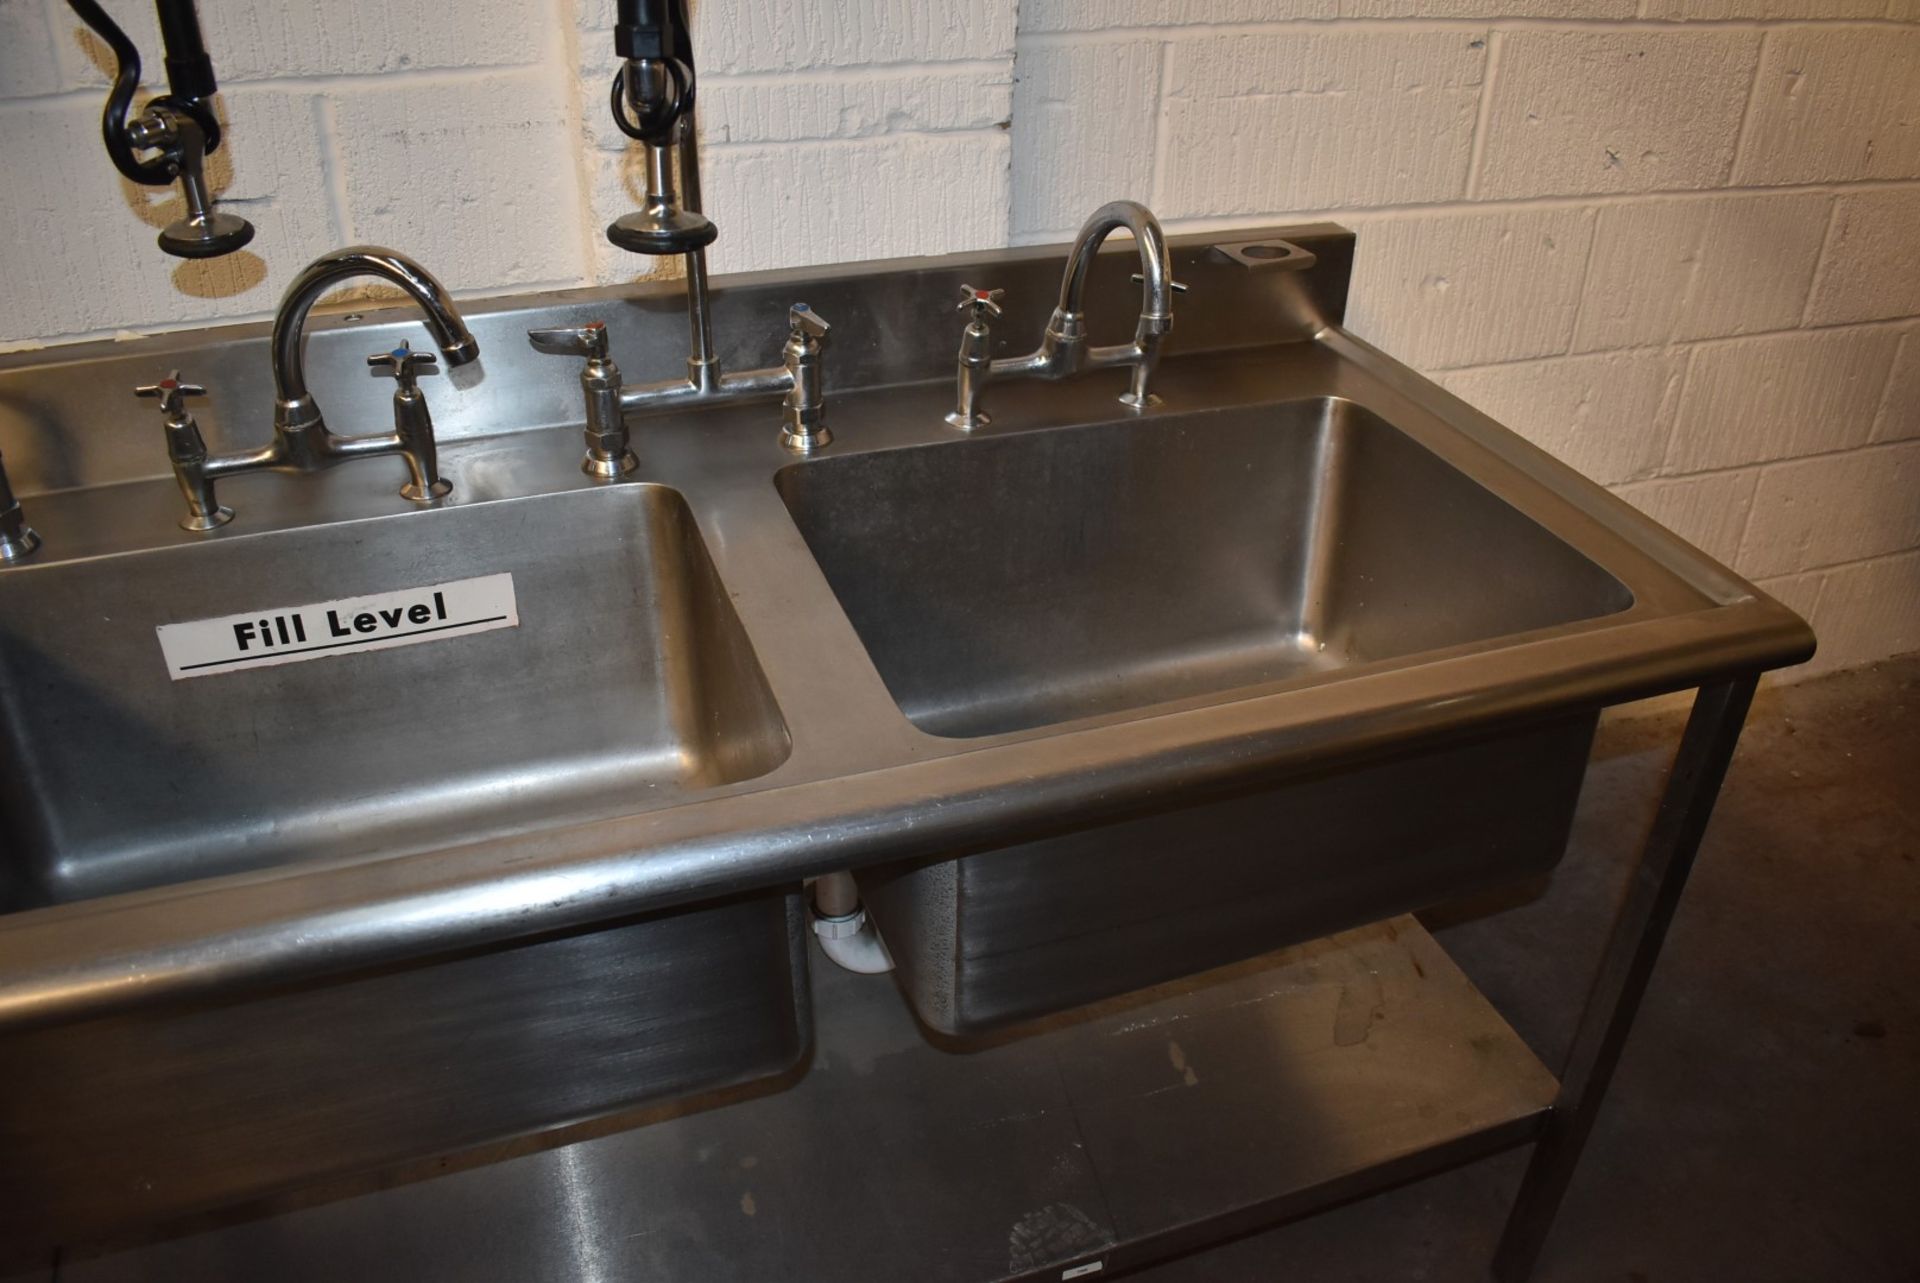 1 x Stainless Steel Triple Bowl Sink Unit With Mixer Taps and Spray Hose Taps - Recently Removed - Image 6 of 16